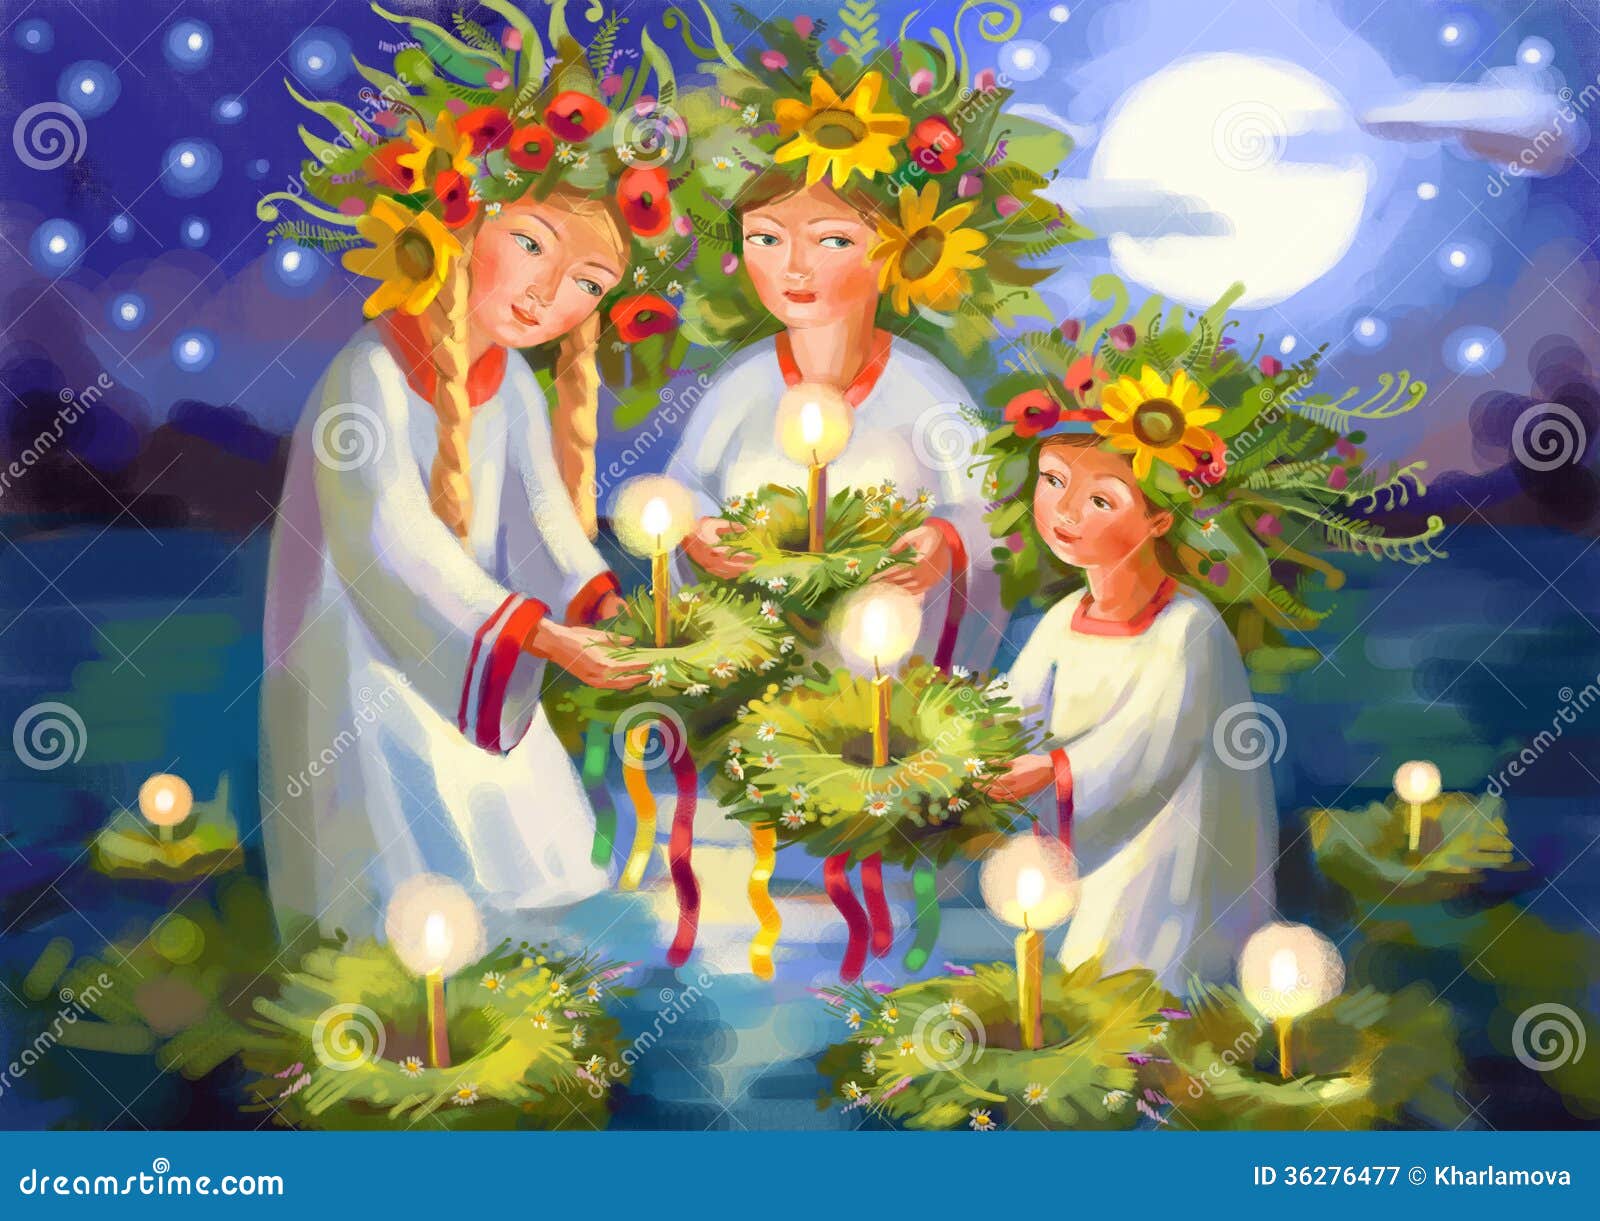 summer solstice clipart free - photo #47